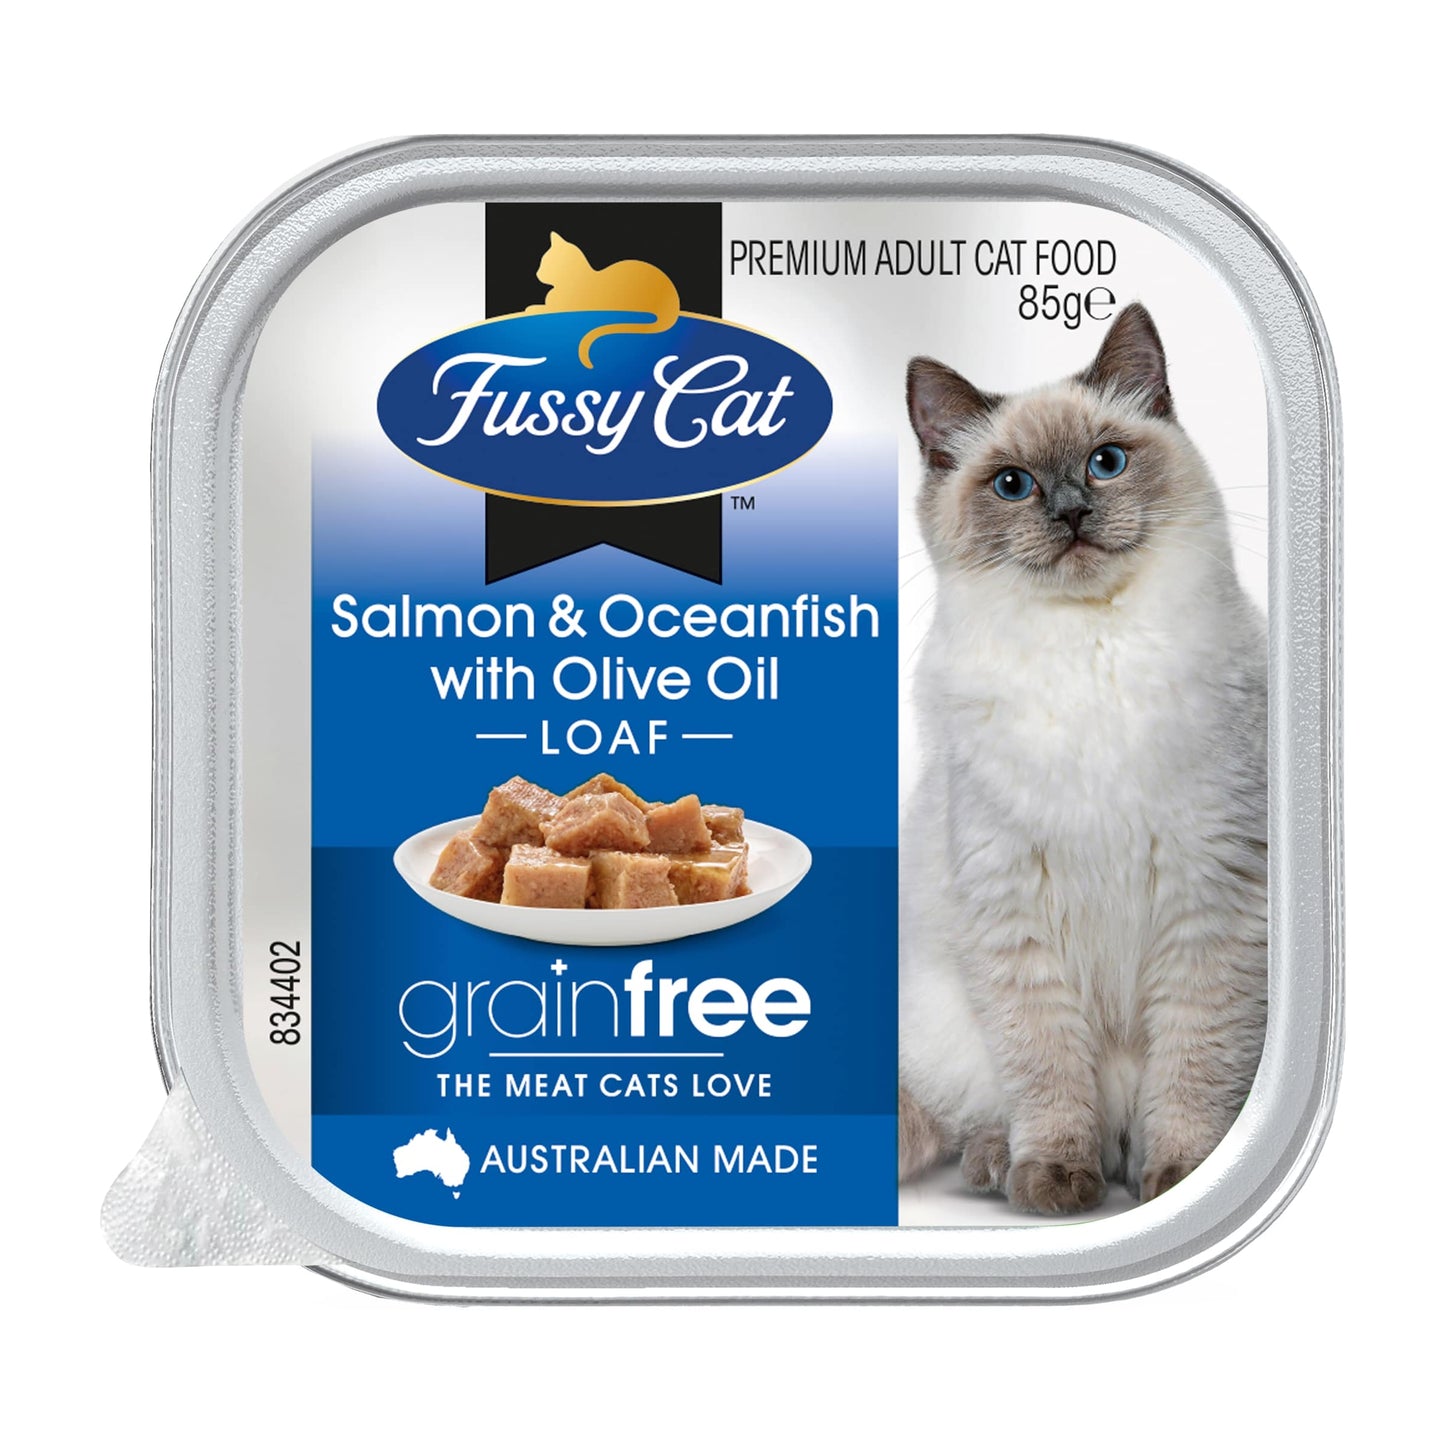 Fussy Cat Adult Grain Free Salmon & Oceanfish with Olive Oil 85g x 9